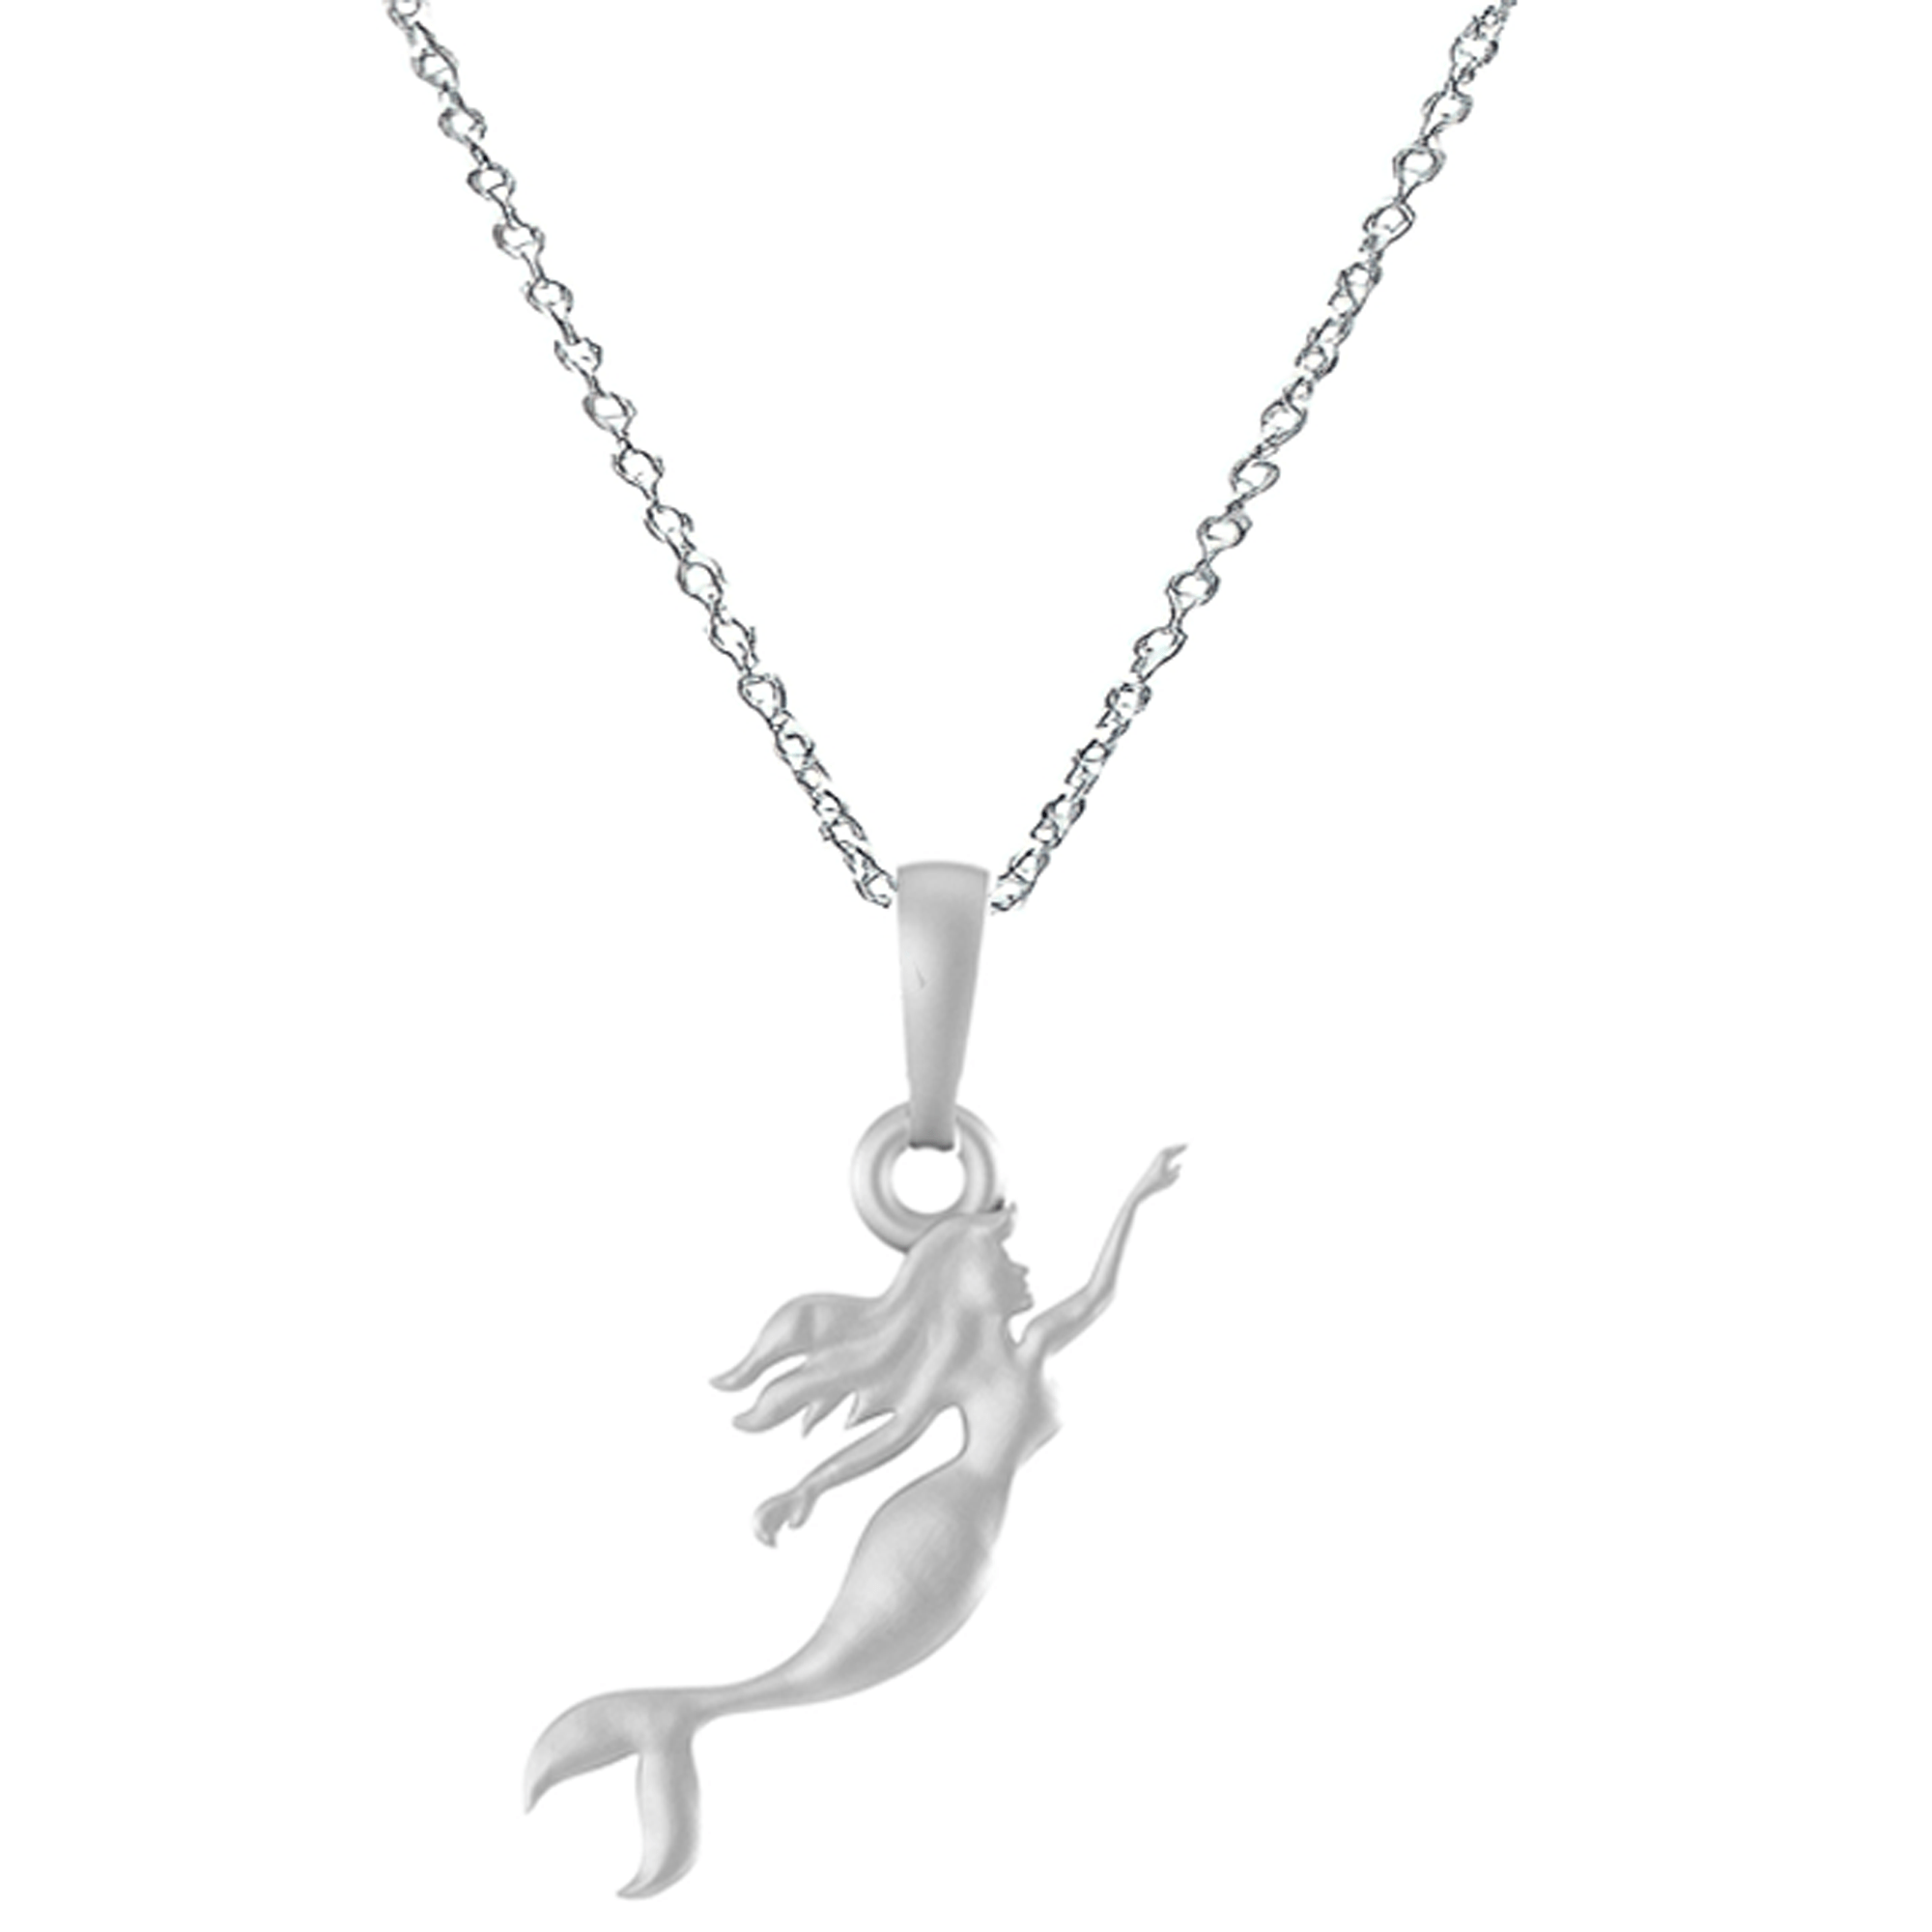 Akshat Sapphire Sterling Silver (92.5% purity) ambitious and Stylish divine Mermaid Chain Pendant  (Pendant with Anchor Chain-22 inches) for Men & Women Pure Silver Fashionable and gorgeous Mermaid Chain Locket for Happiness and joy